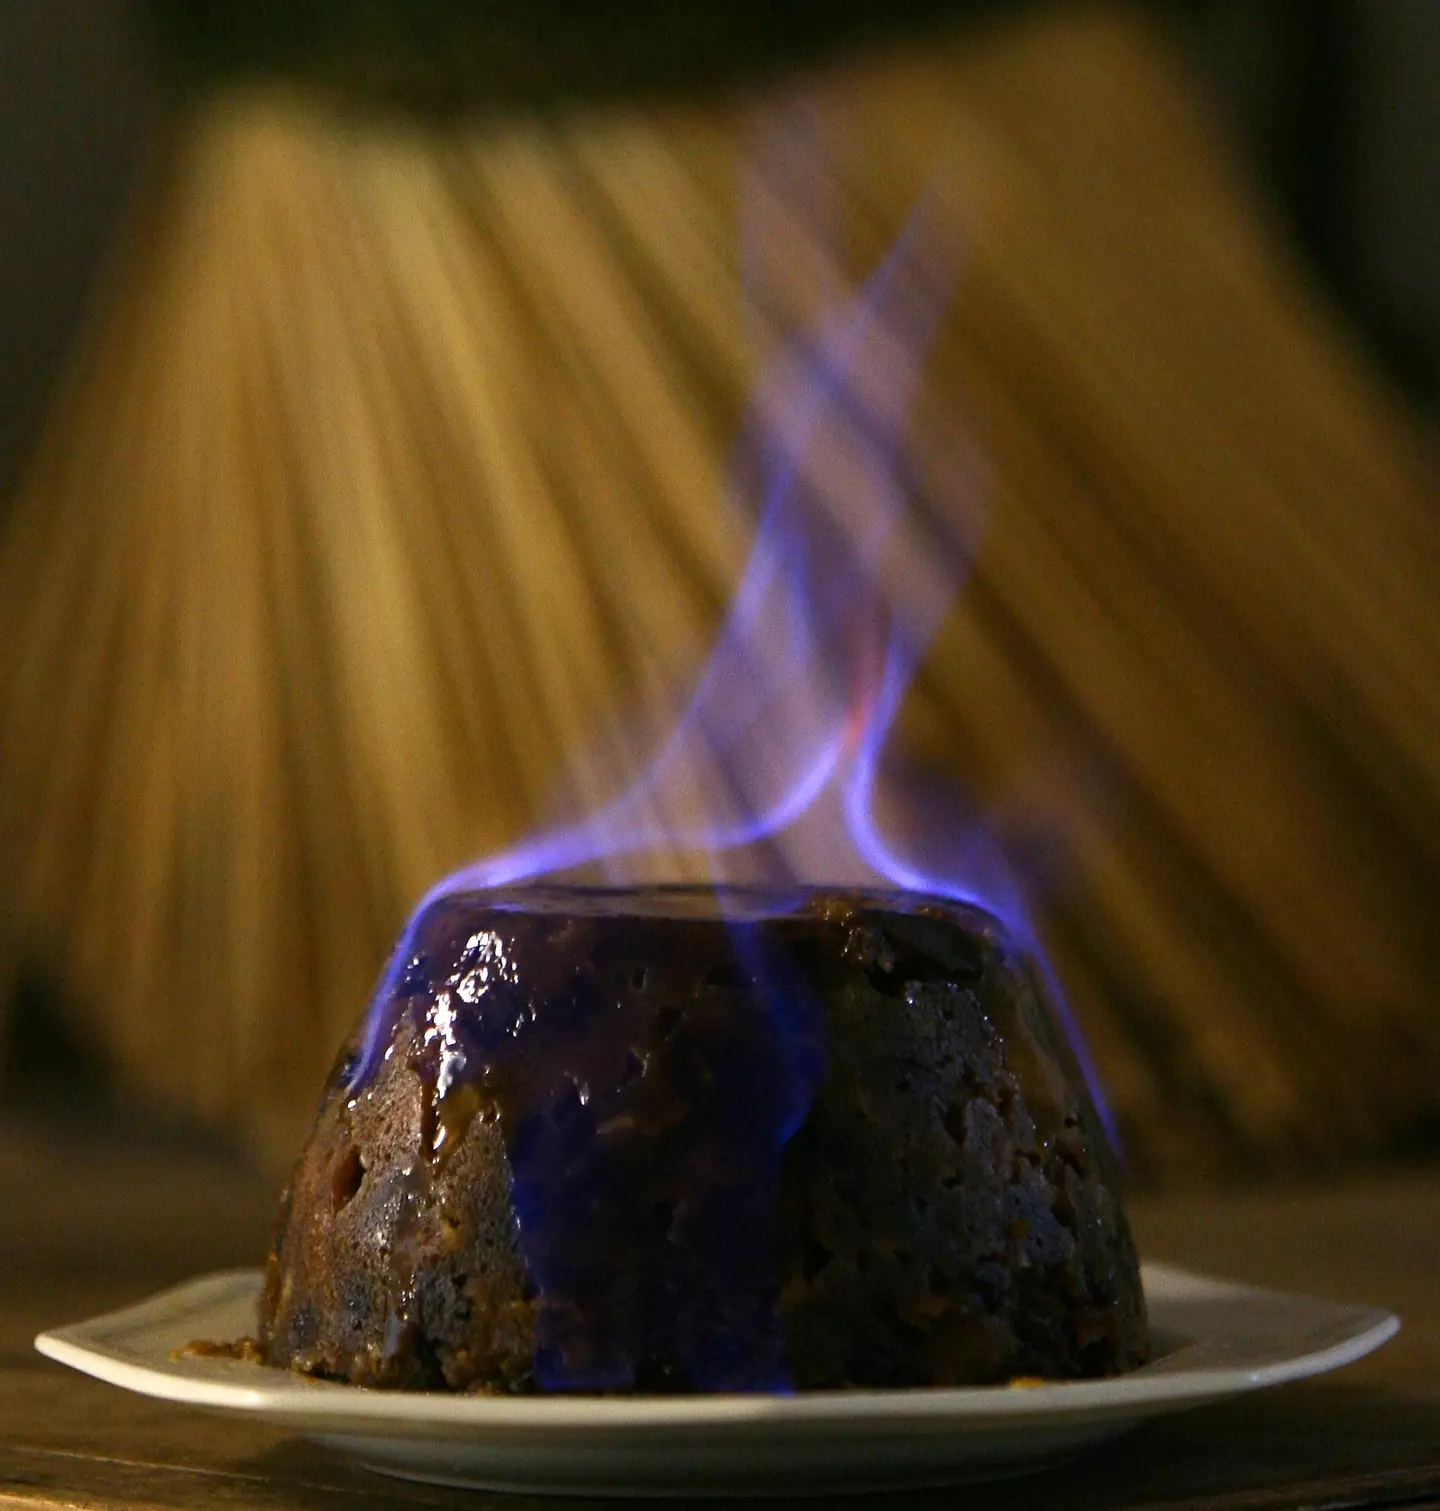 Yes, we set it our pudding on fire at Christmas.